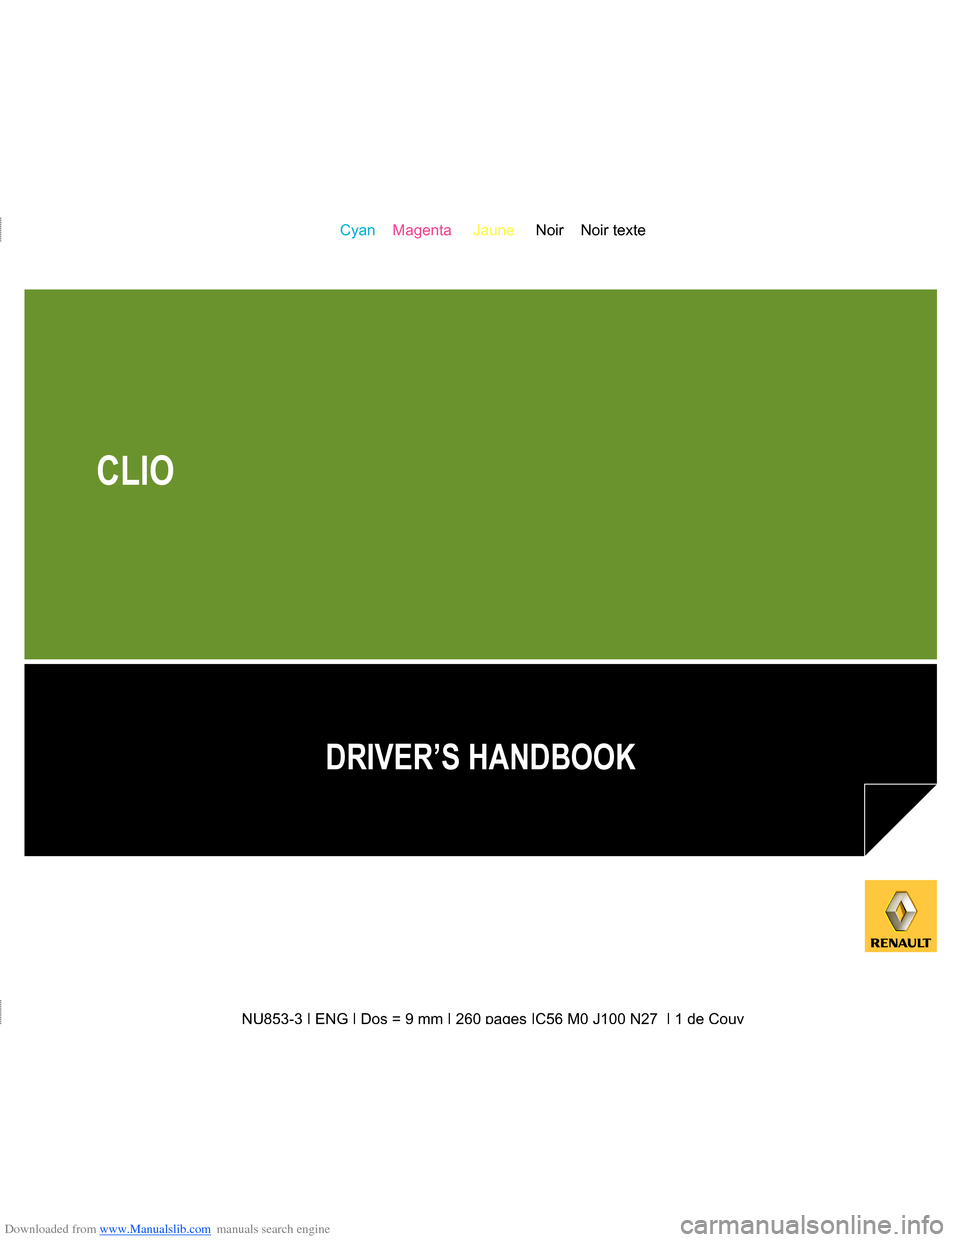 RENAULT CLIO 2009 X85 / 3.G Owners Manual Downloaded from www.Manualslib.com manuals search engine NU853-3 | ENG | Dos = 9 mm | 260 pages |C56 M0 J100 N27  | 1 de Couv
Cyan    Magenta     Jaune     Noir    Noir texte
NU853-3 | ENG | Dos = 9 m